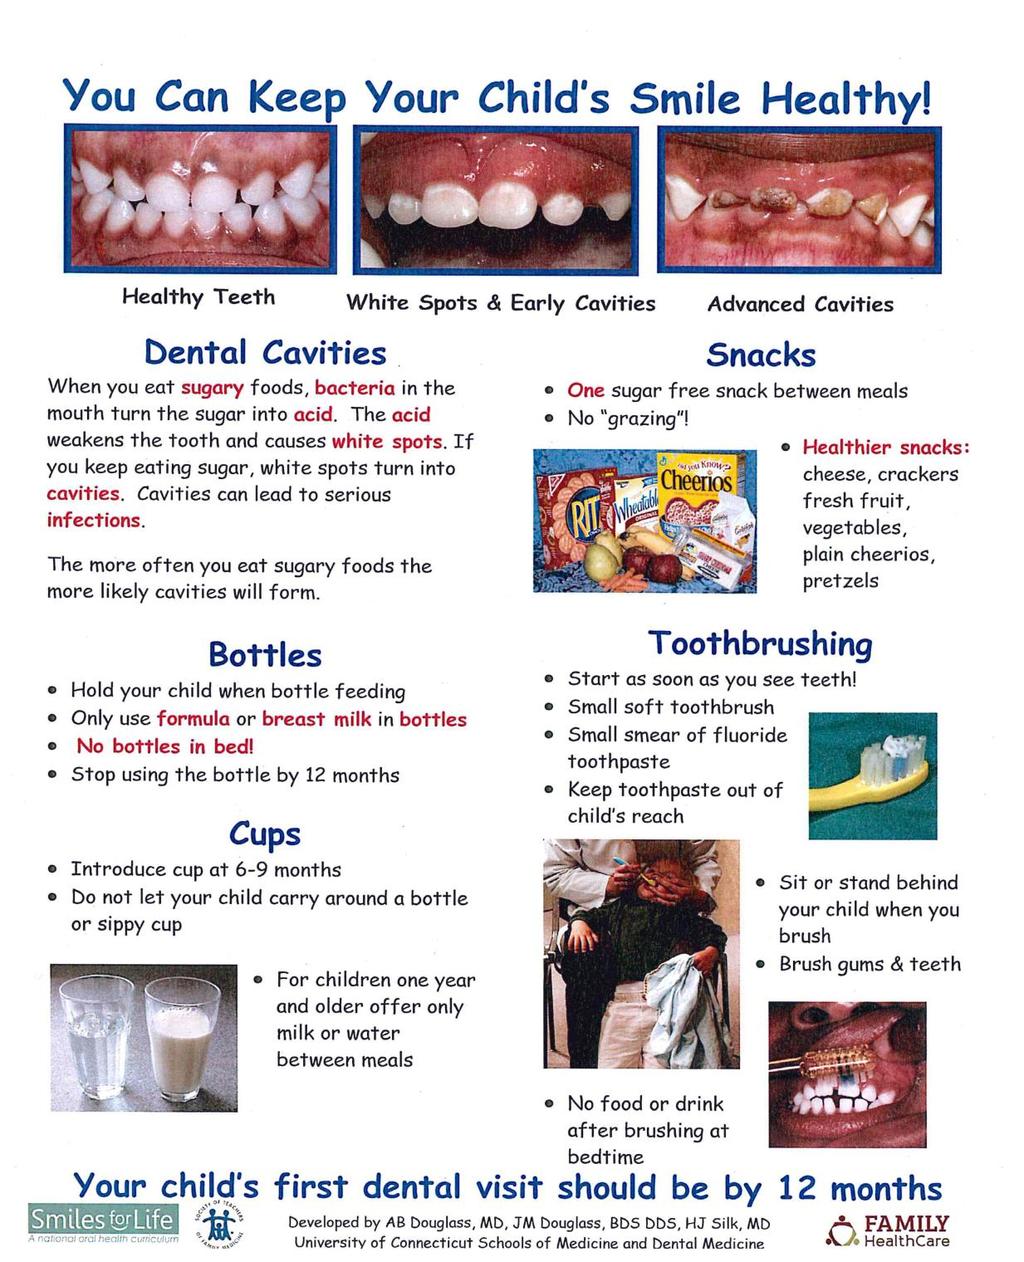 Patient/Parent Education Use Smiles for Life educational materials (English/Spanish); translated for Arabic, Bosnian, Nepali, and